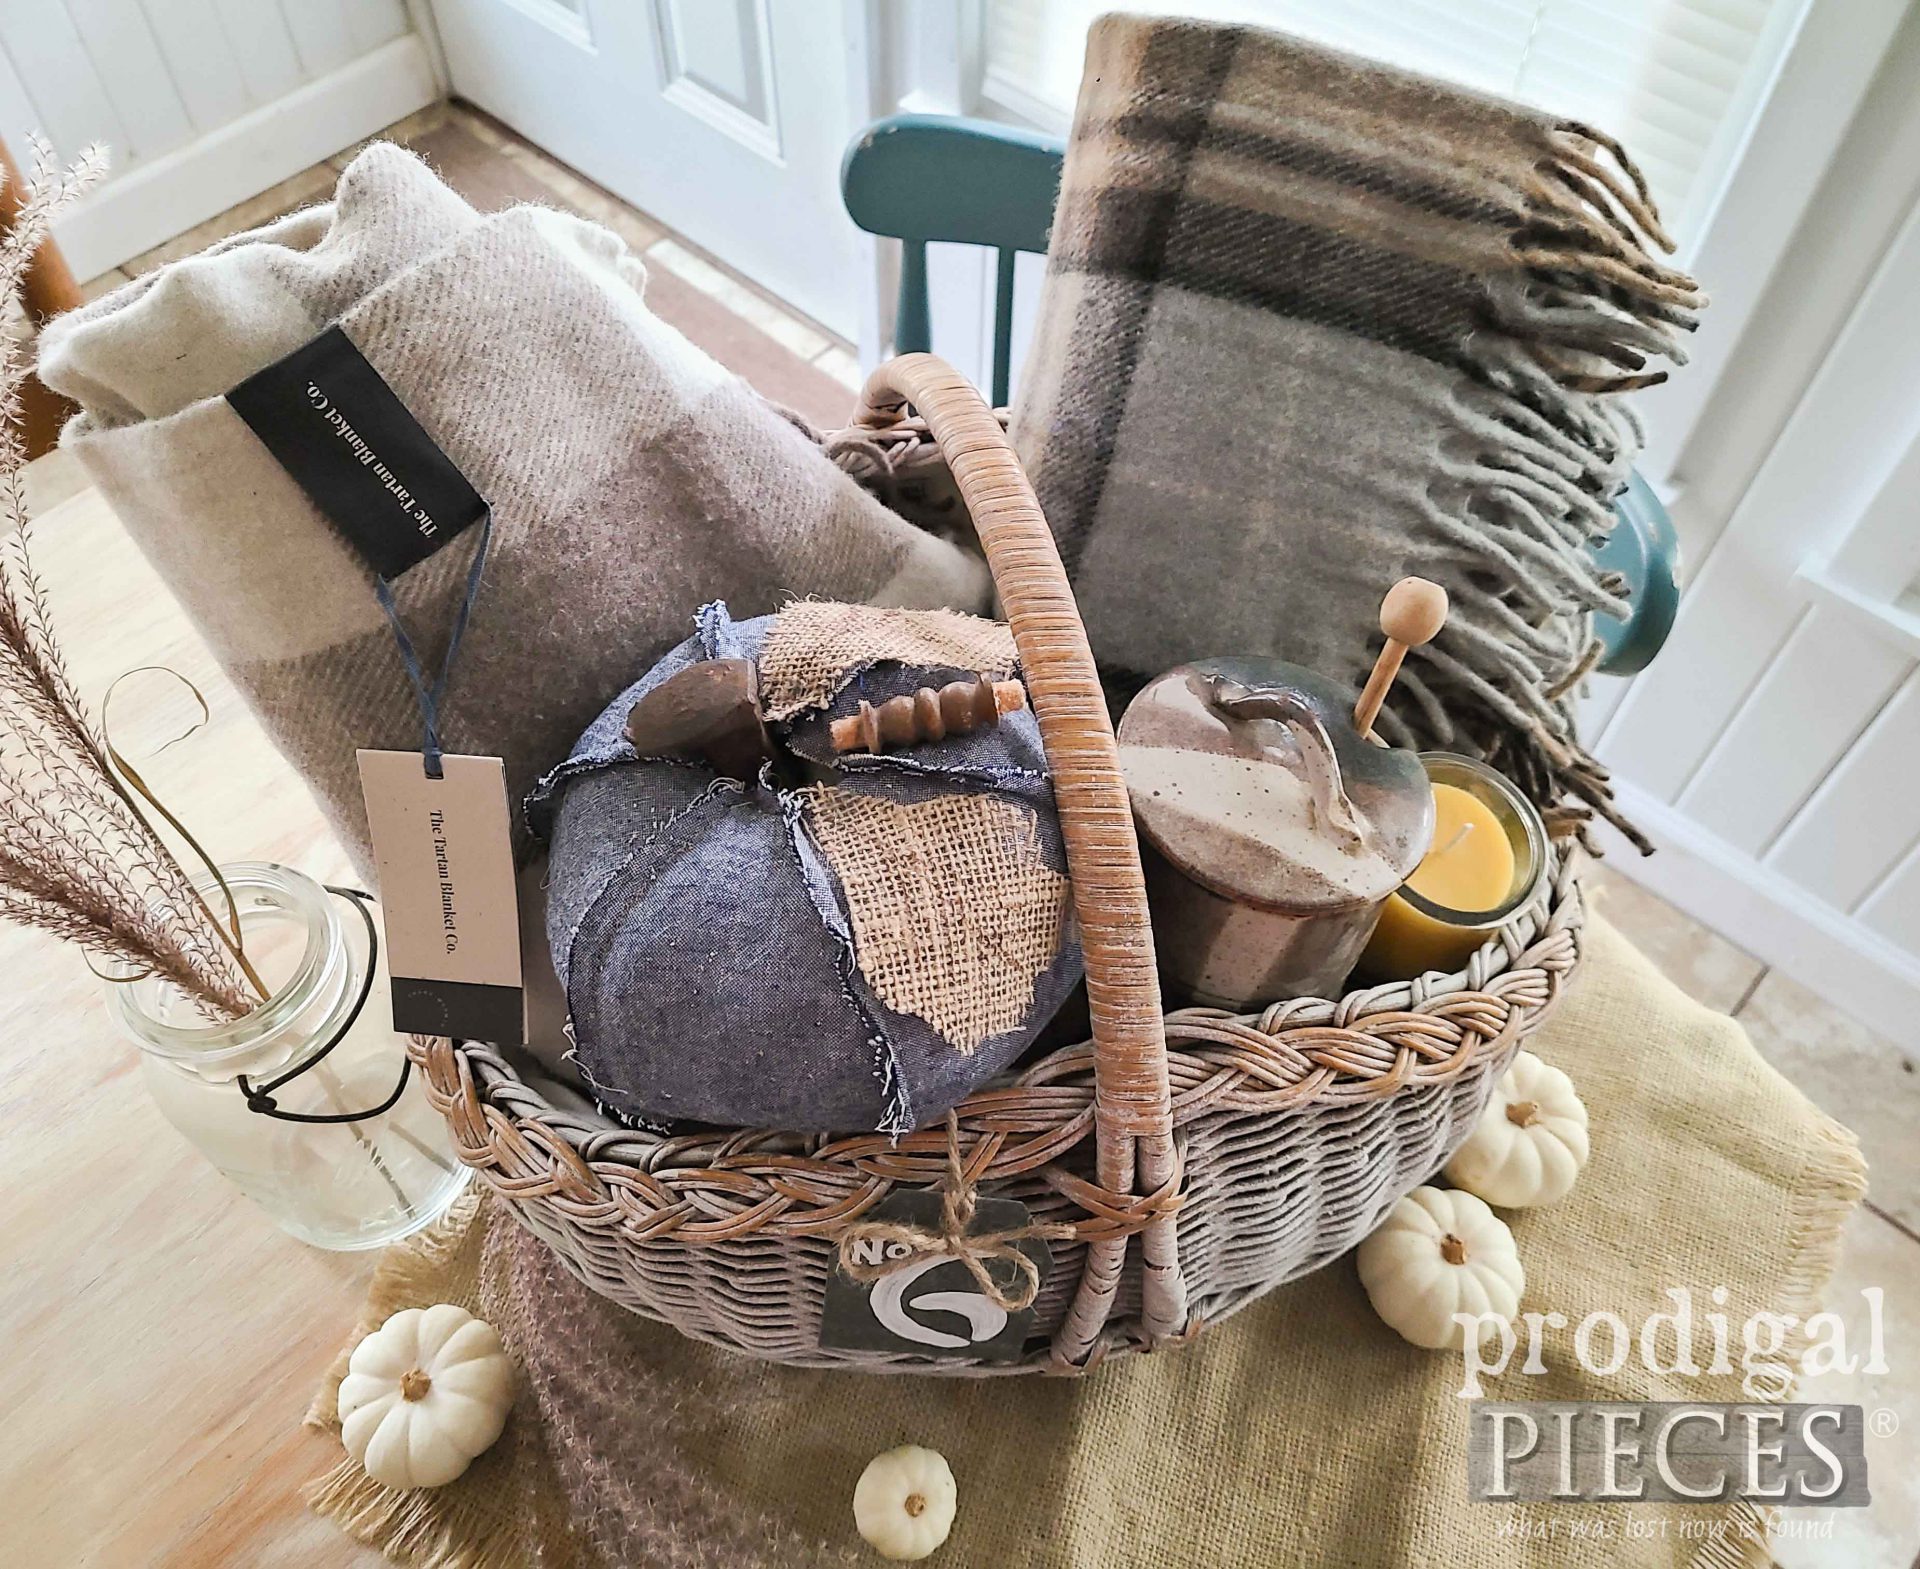 Fall Goodies for a Harvest Gift Basket by Larissa of Prodigal Pieces | prodigalpieces.com #prodigalpieces #fall #harvest #diy #basket